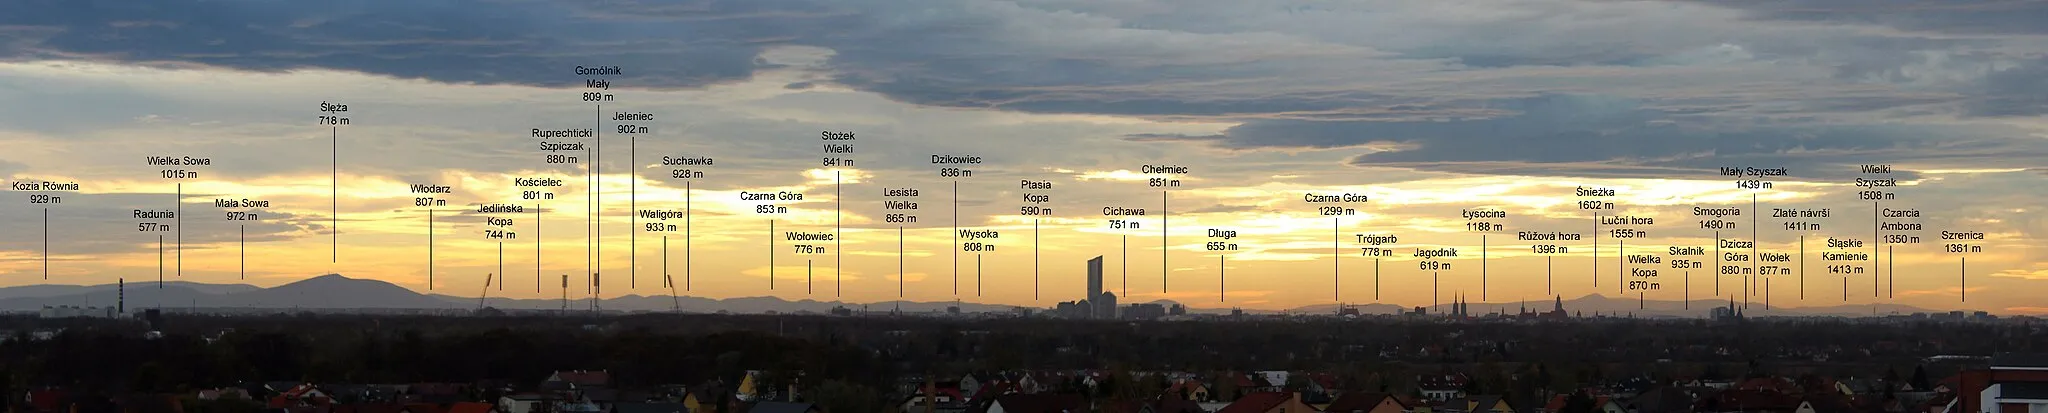 Photo showing: Wrocław - a panorama of the city and the peaks on its background; Ślęża, Sudety, Karkonosze